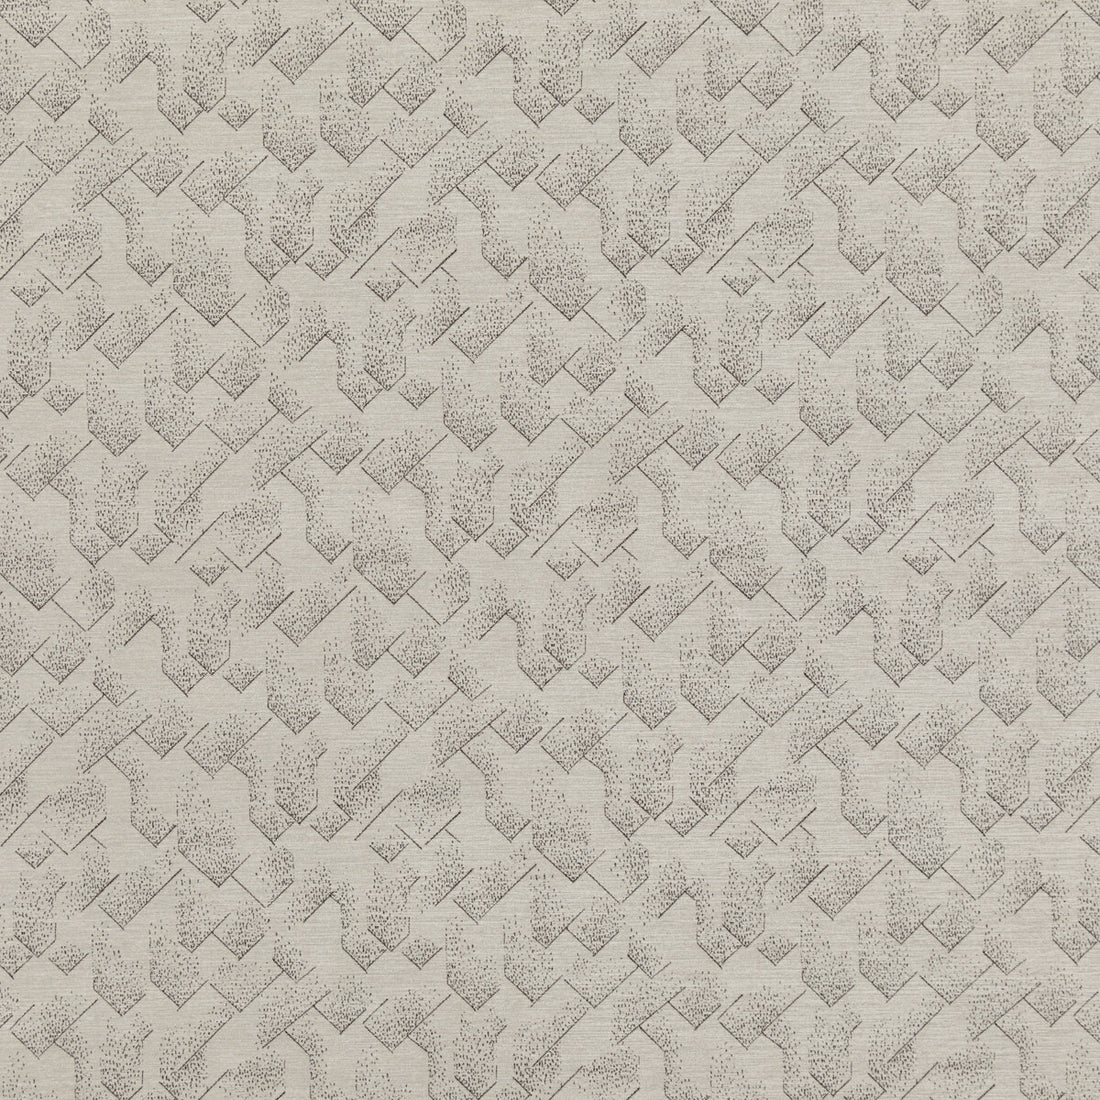 Brink fabric in cinder/wood color - pattern GWF-3733.18.0 - by Lee Jofa Modern in the Kelly Wearstler IV collection